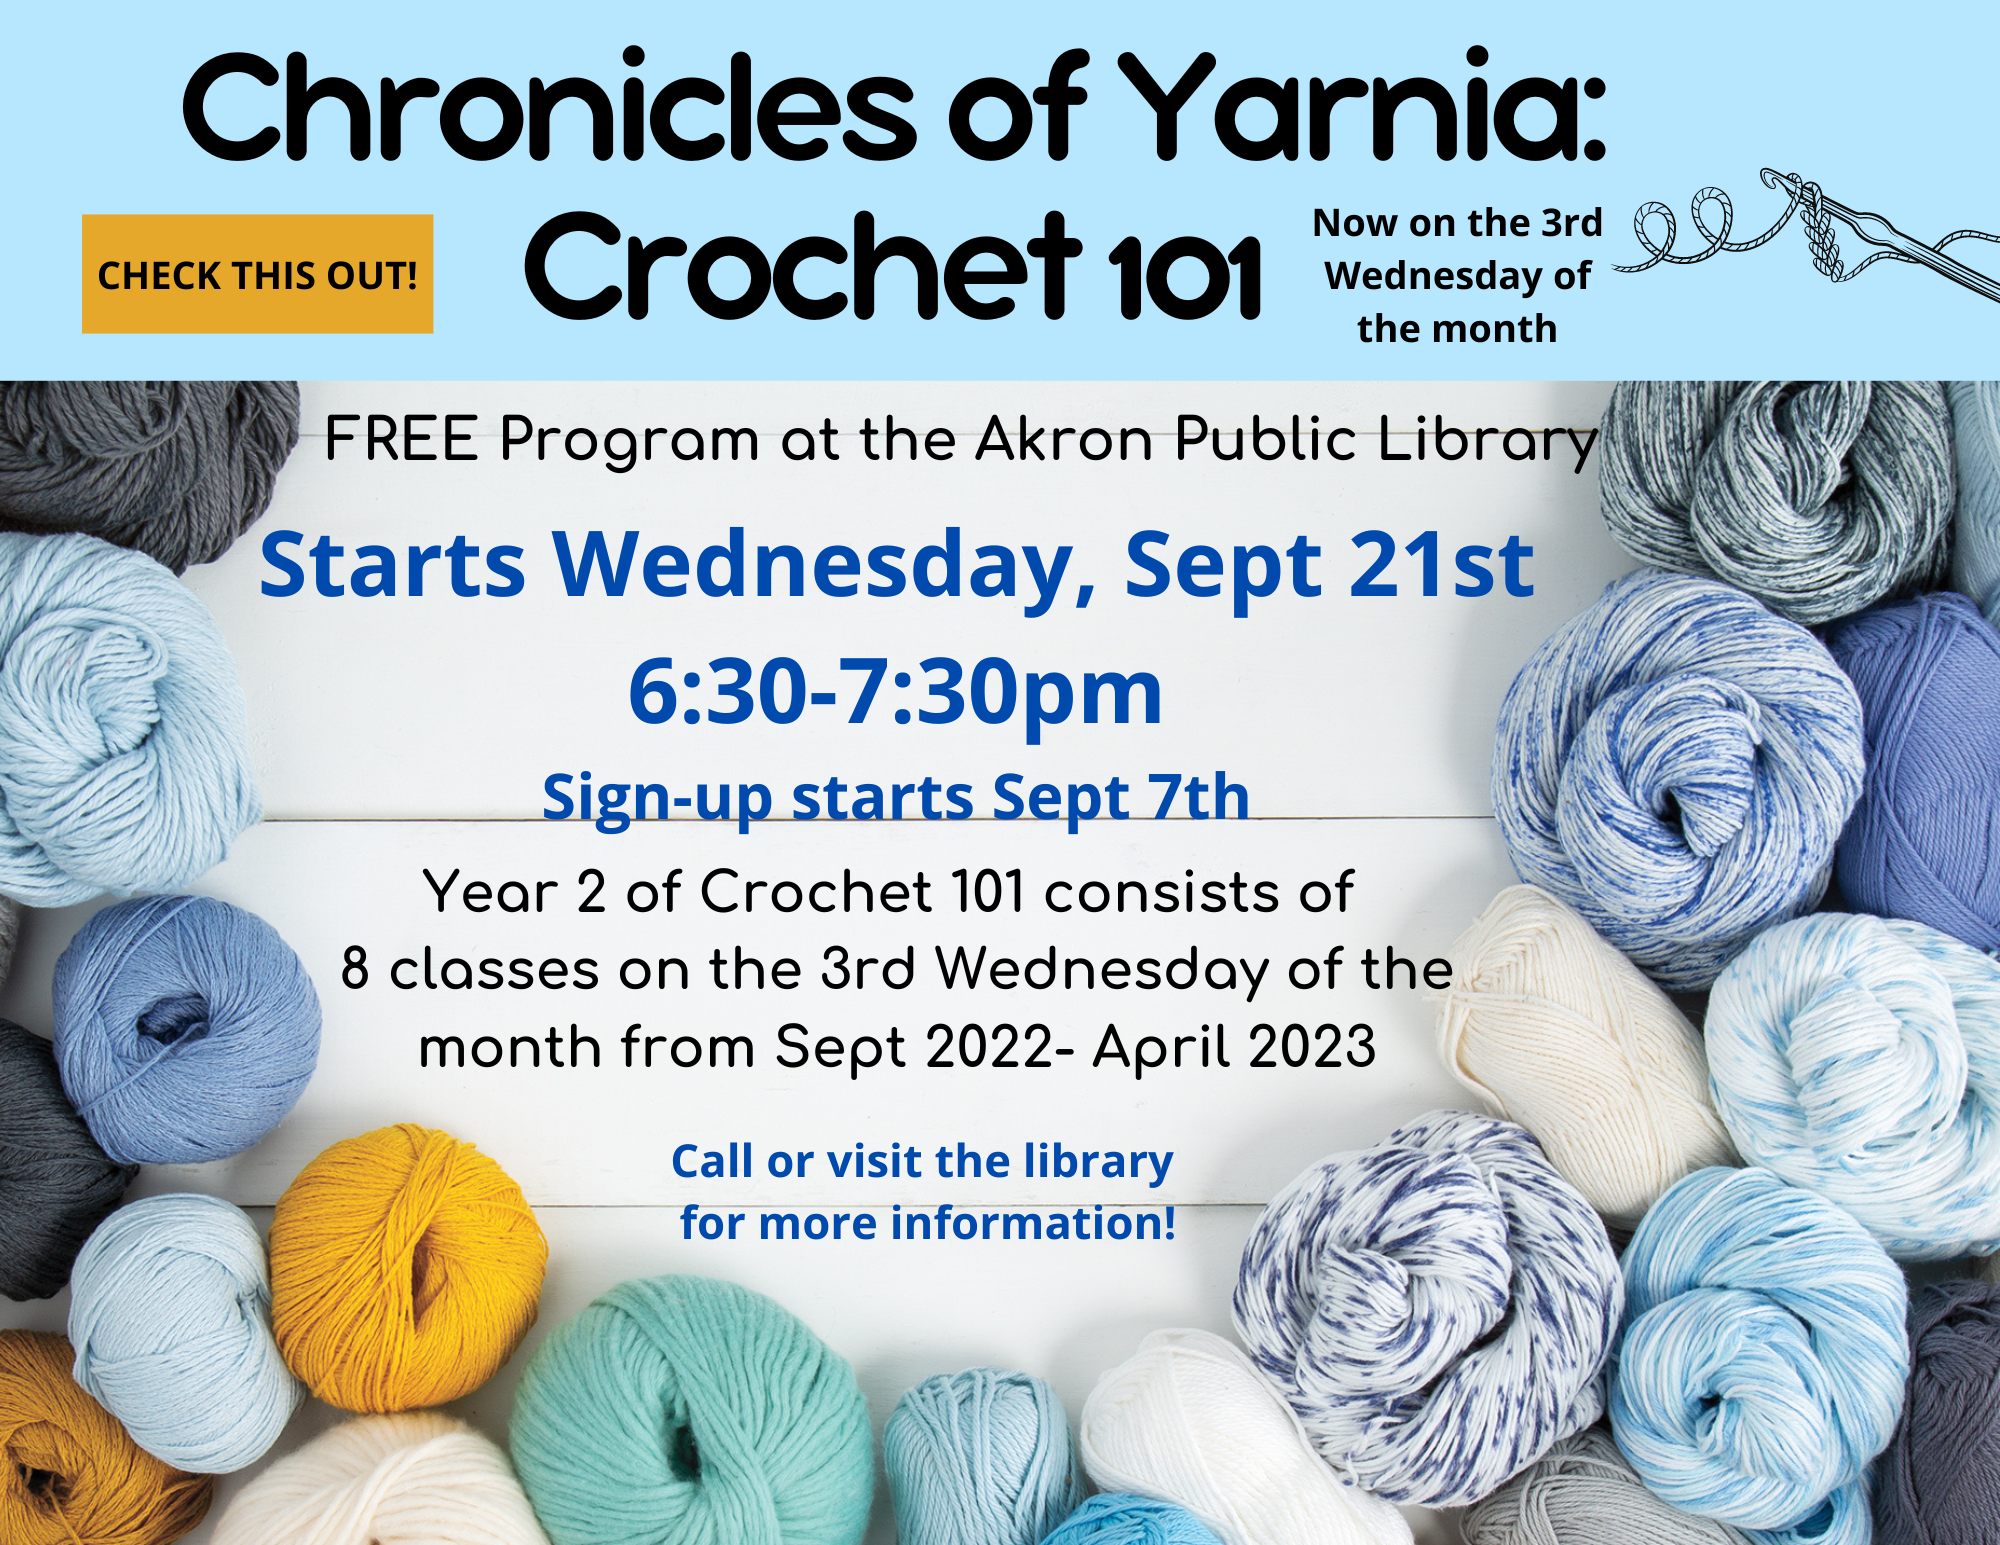 Chronicles of Yarnia Crochet 101 with check this out.png